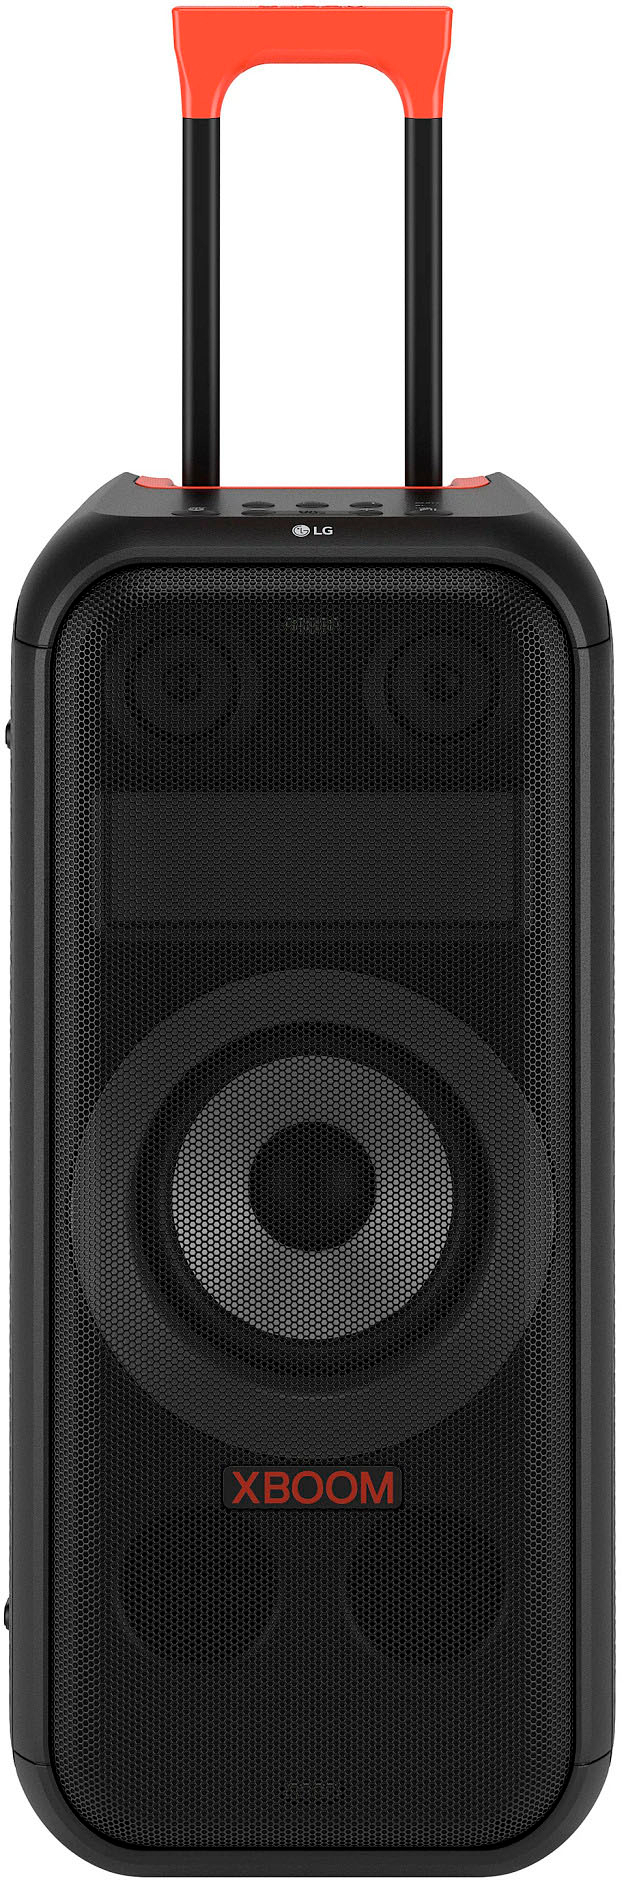 LG XBOOM with XL7S Tower Black Party Best Speaker Buy XL7 - Pixel LED Portable